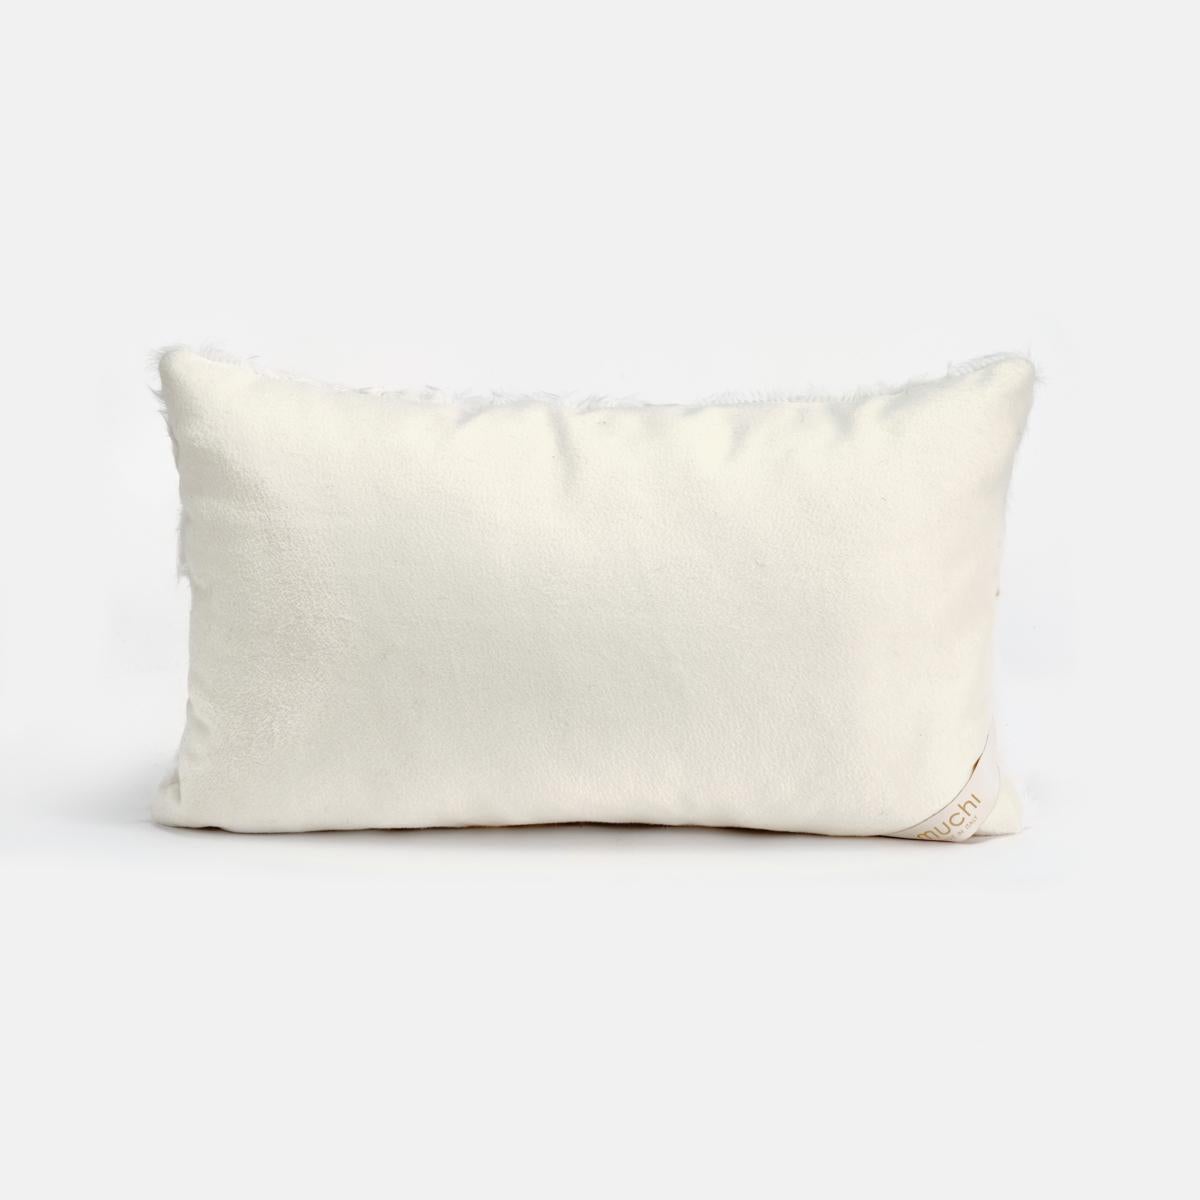 Waves White Xiangao Lamb Fur Pillow Cushion by Muchi Decor In New Condition For Sale In Poviglio, IT